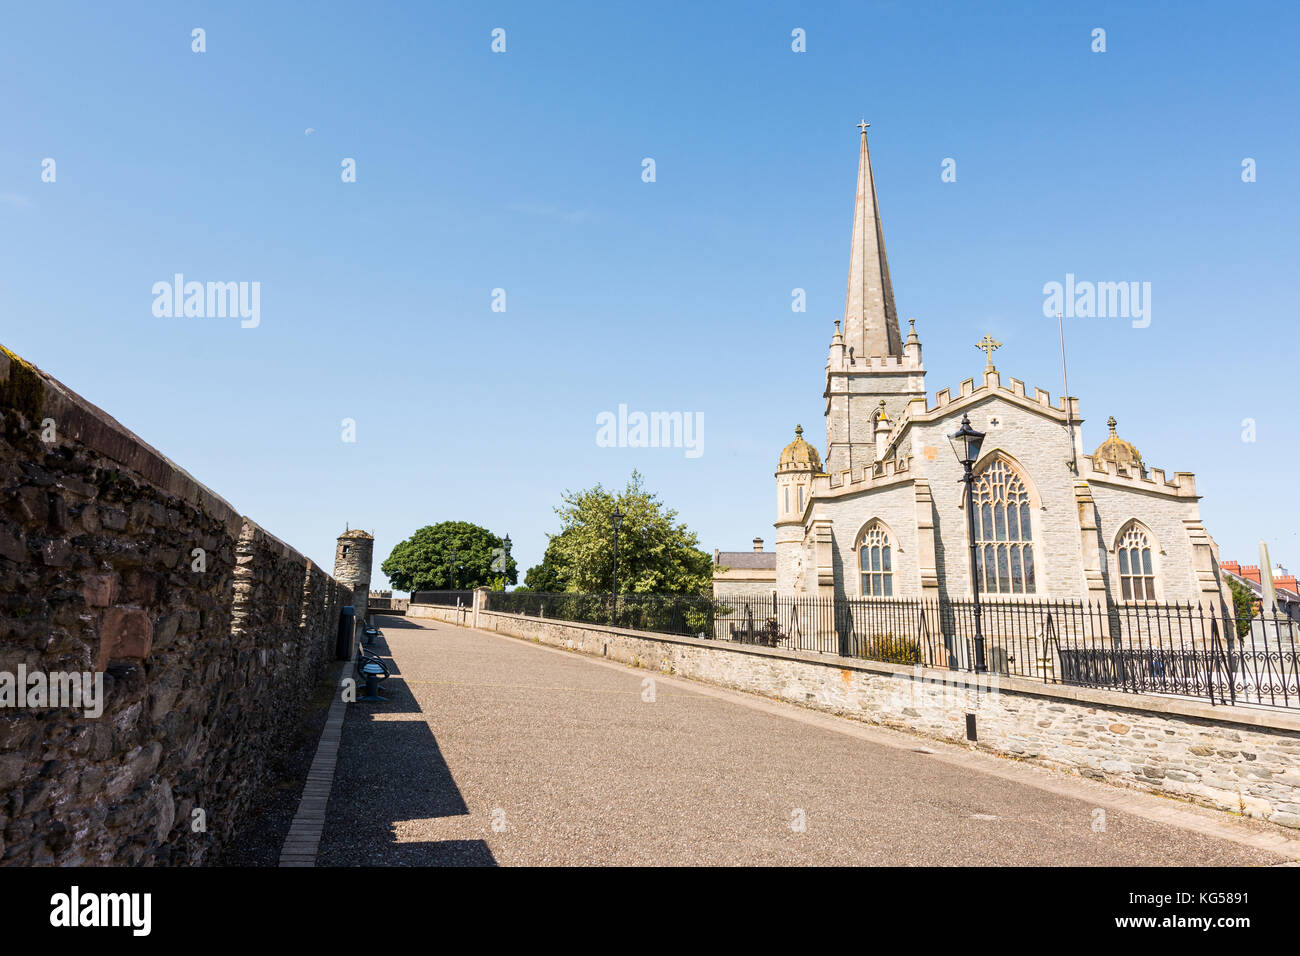 St columb's Cathedral, Derry, Irlanda del Nord Foto Stock